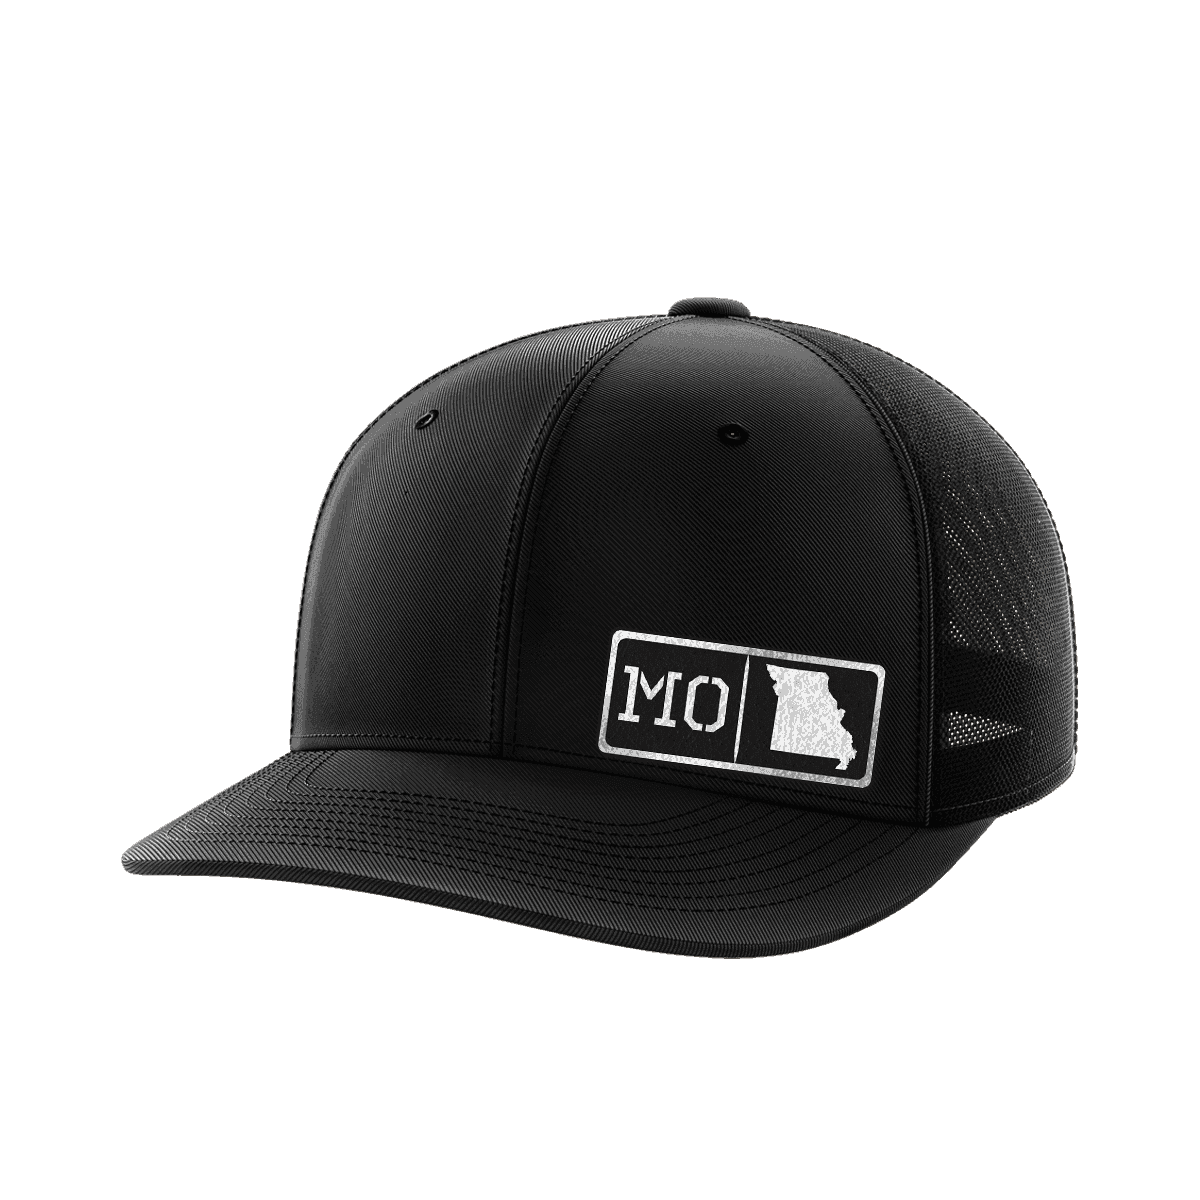 Thumbnail for Missouri Homegrown Hats - Greater Half